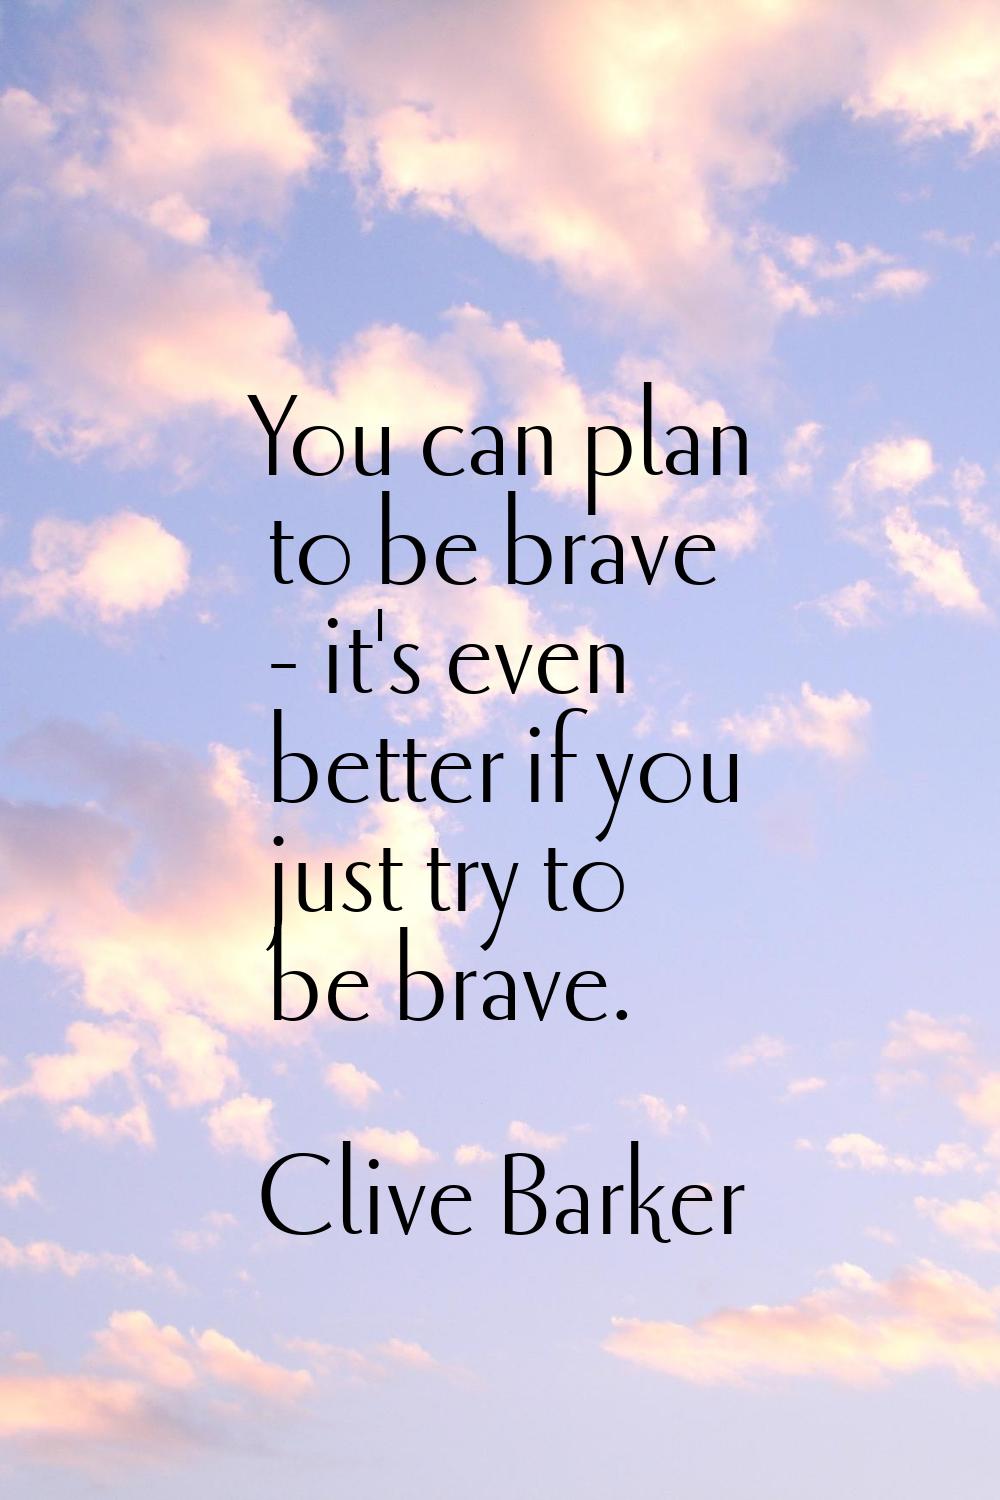 You can plan to be brave - it's even better if you just try to be brave.